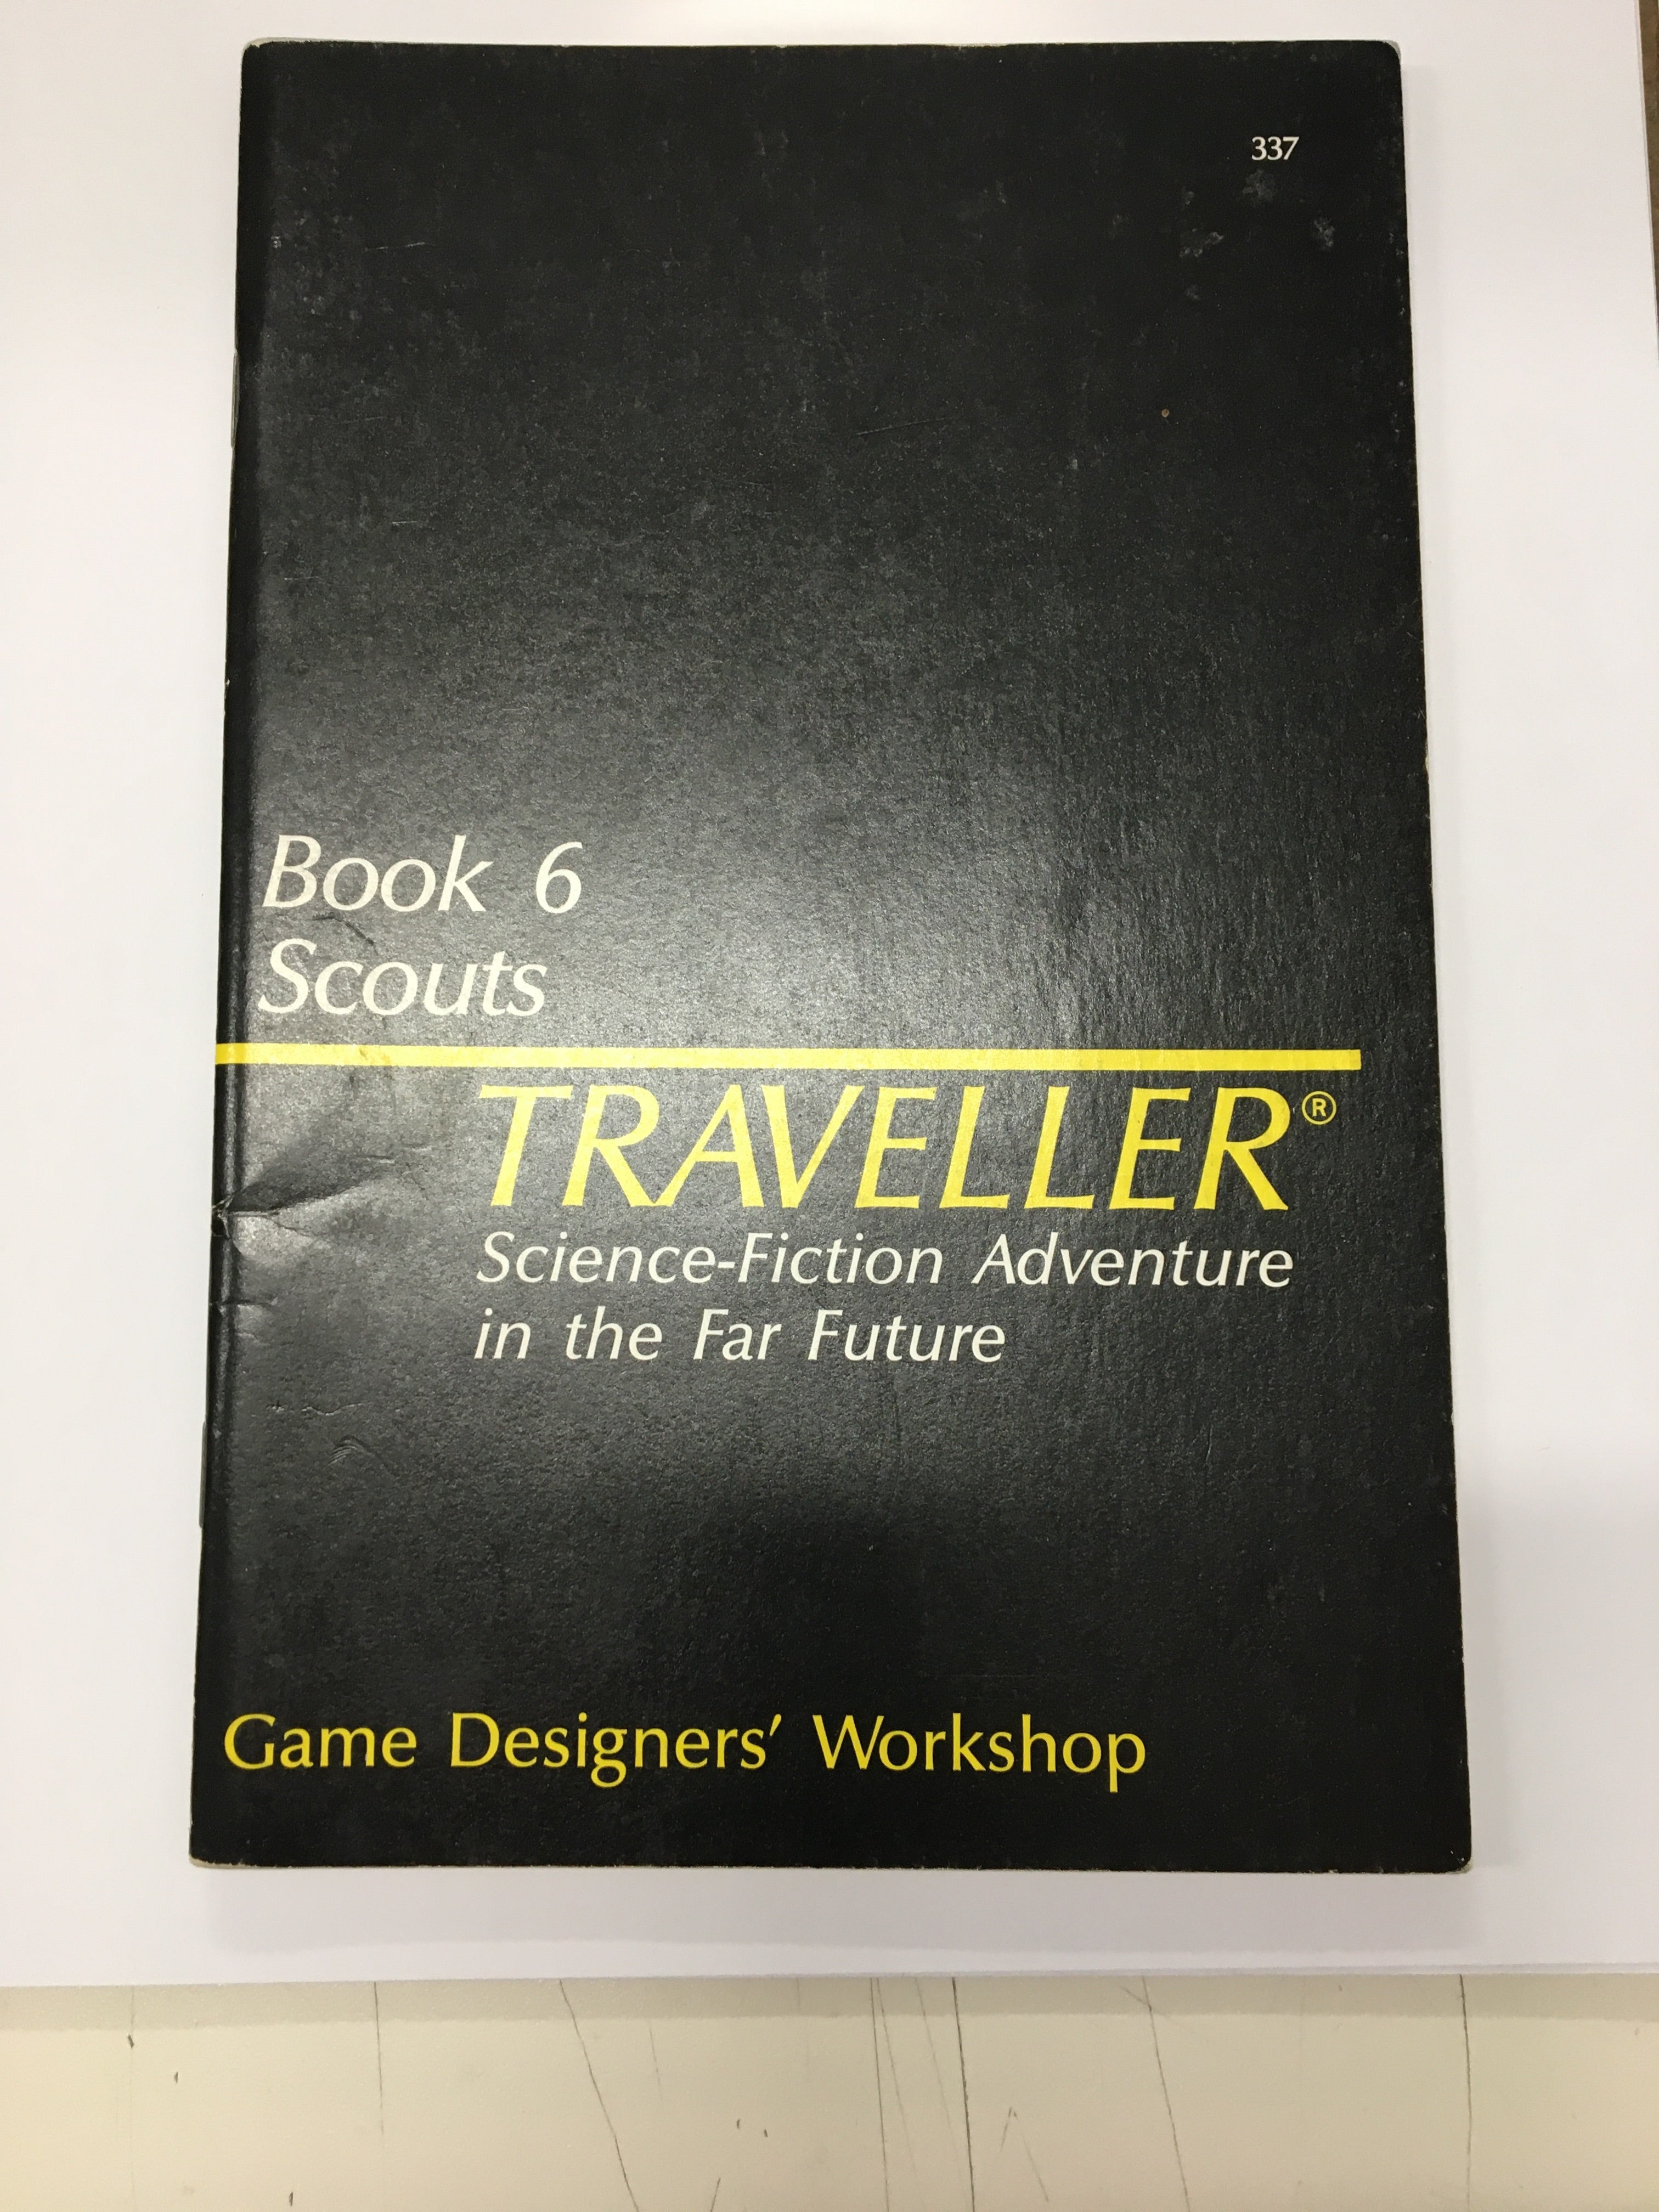 Traveller Book 6: Scouts used | L.A. Mood Comics and Games